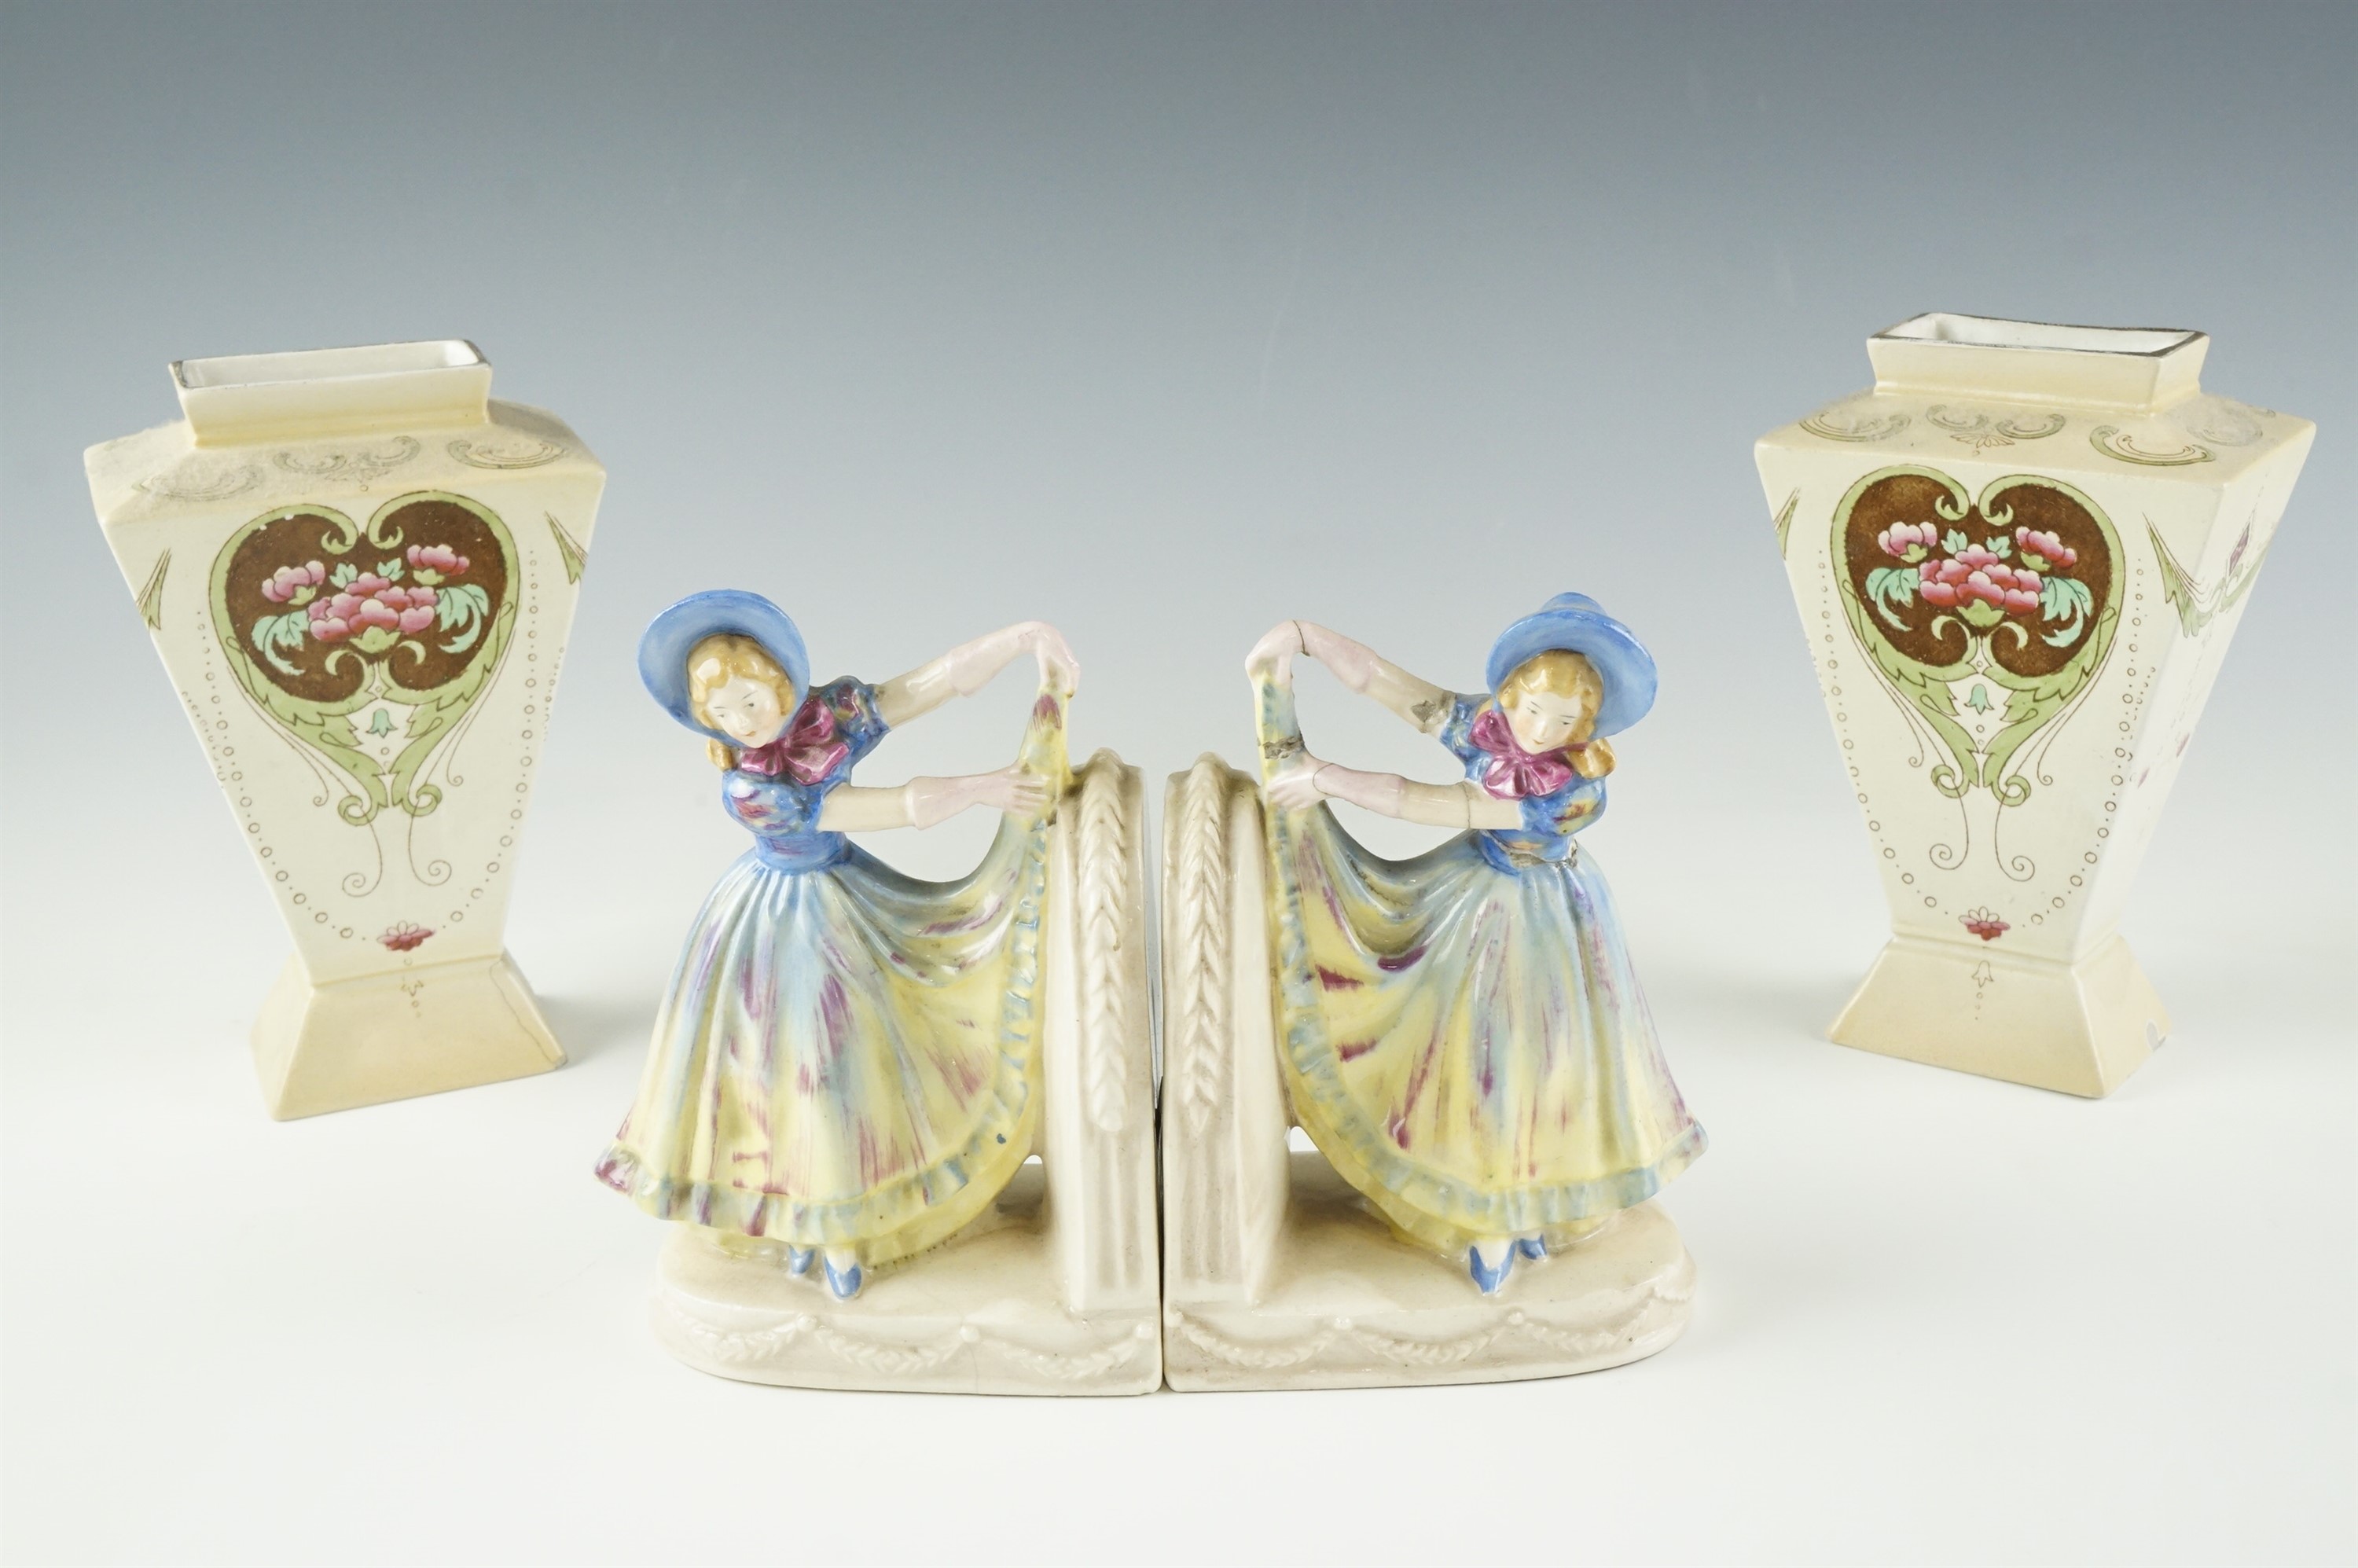 A pair of 1920s figural ceramic book ends, modelled as a girl lifting her hem, marked '37144' to the